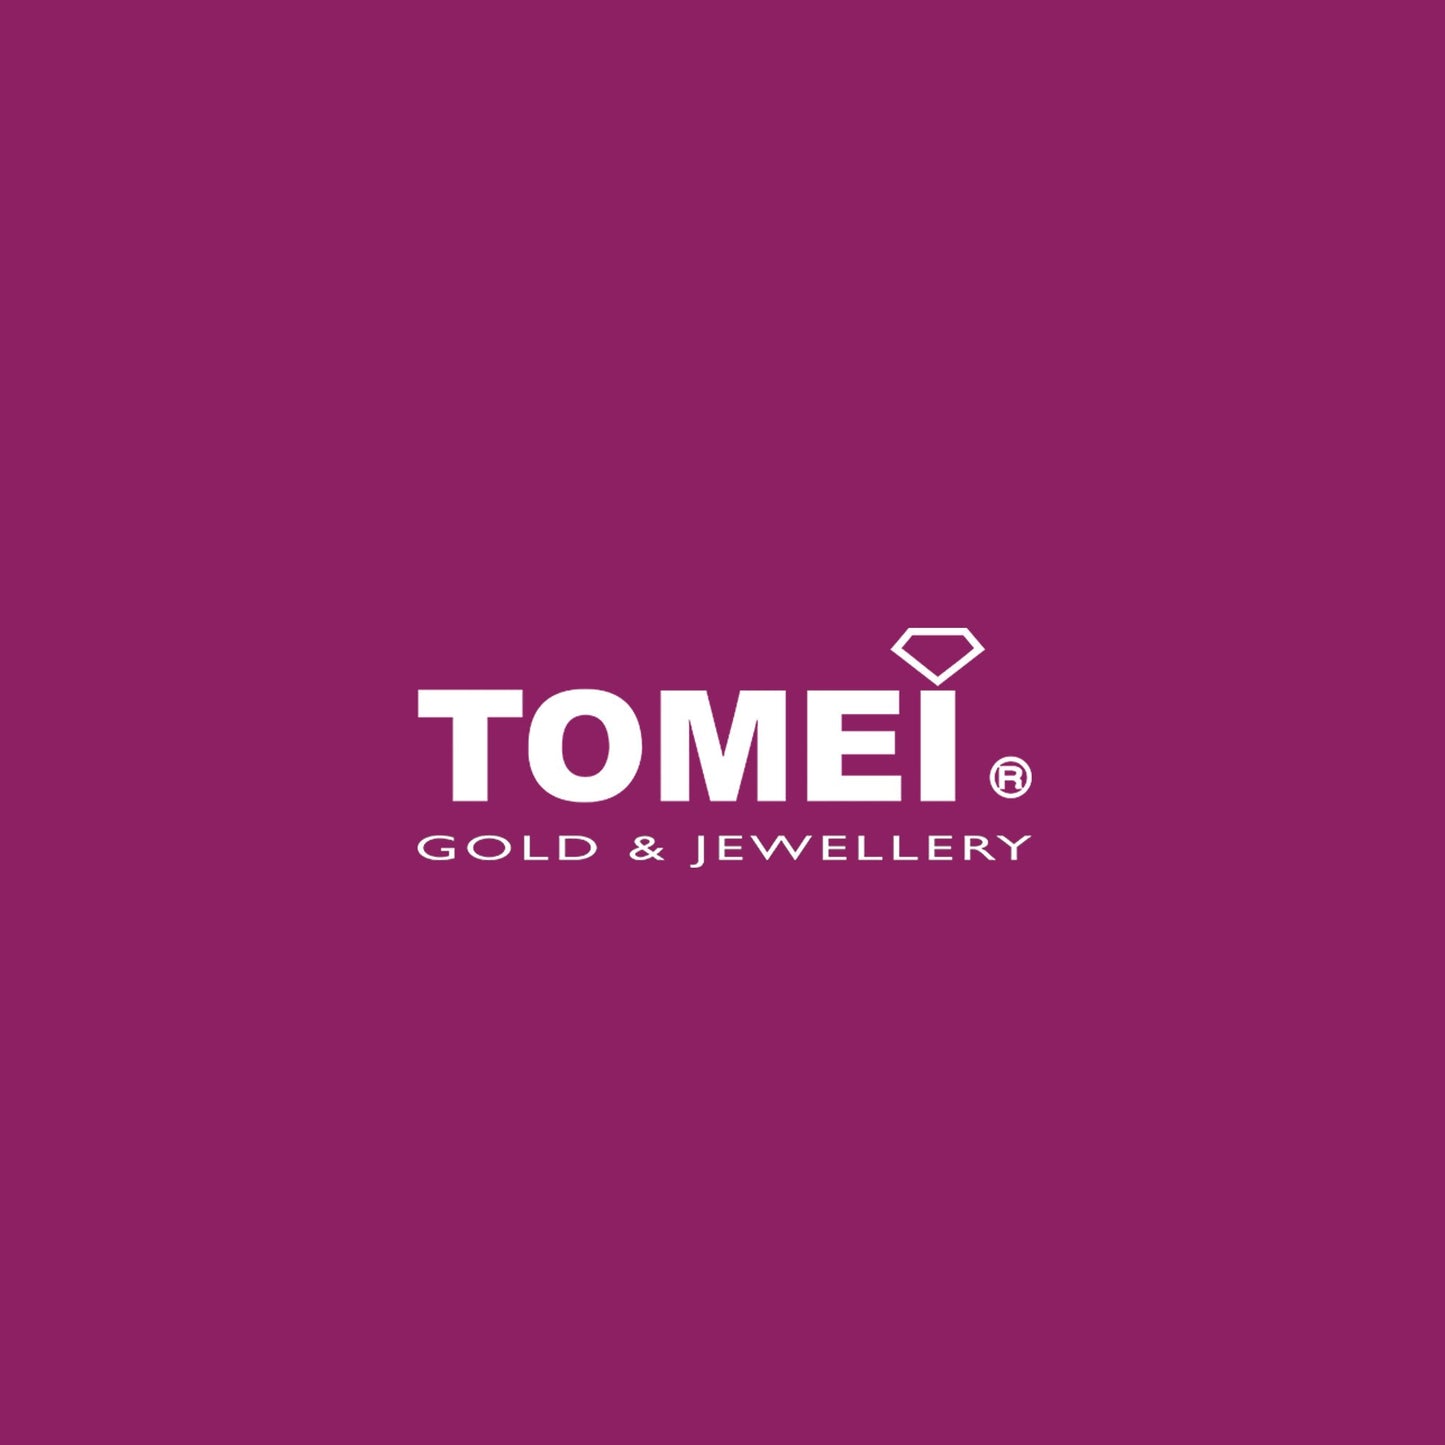 TOMEI Love Is Beautiful Collection Diamond Pendant, White+Rose Gold 585